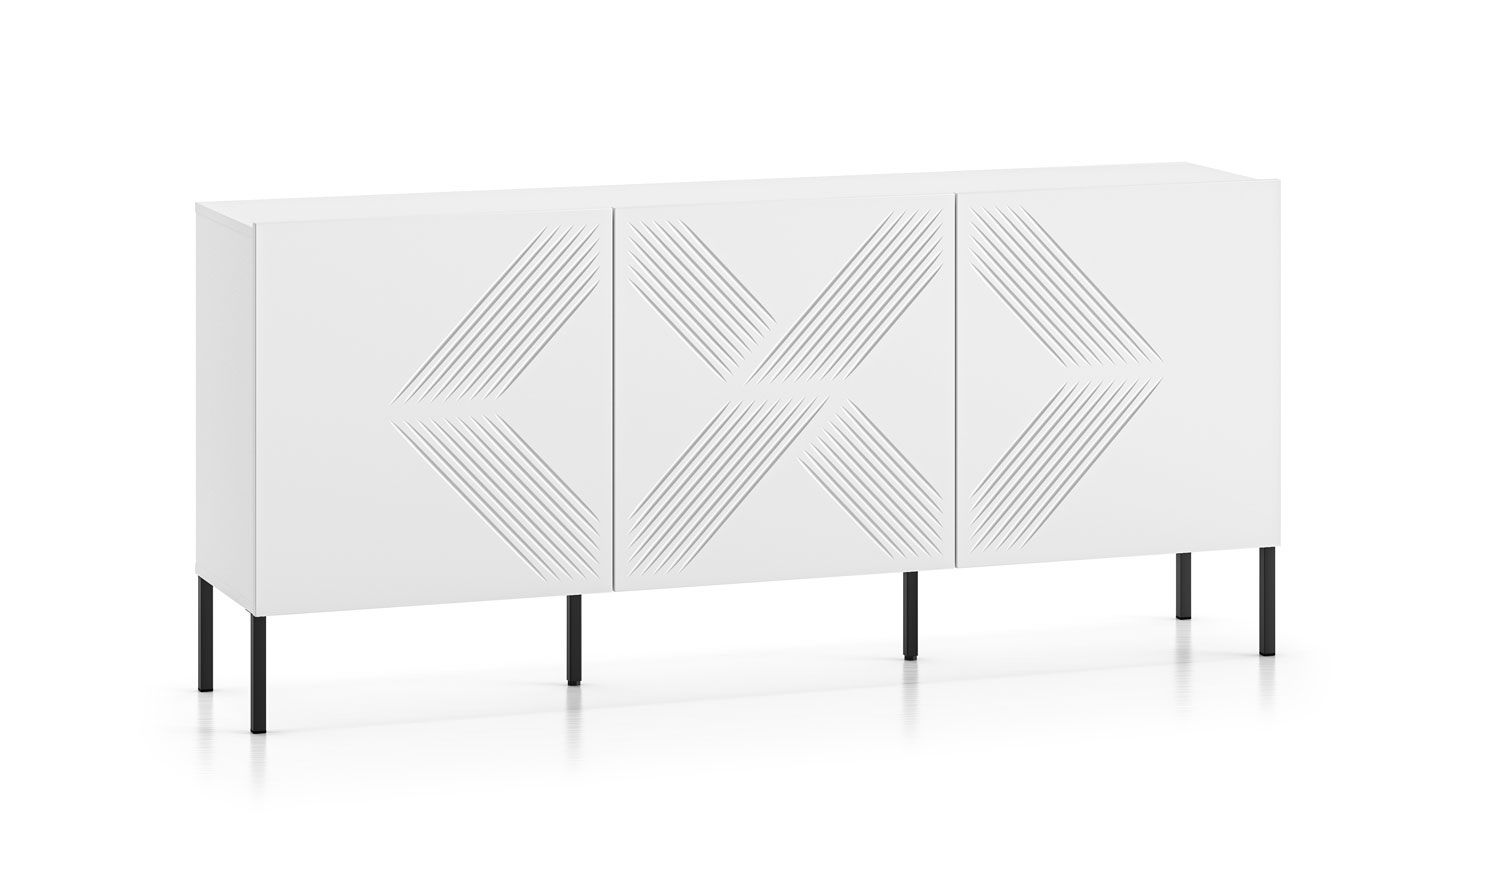 Sideboard / chest of drawers with six compartments Taos 05, color: white matt, legs: black, dimensions: 77 x 170 x 37 cm, with three doors, stylish and decorative front 